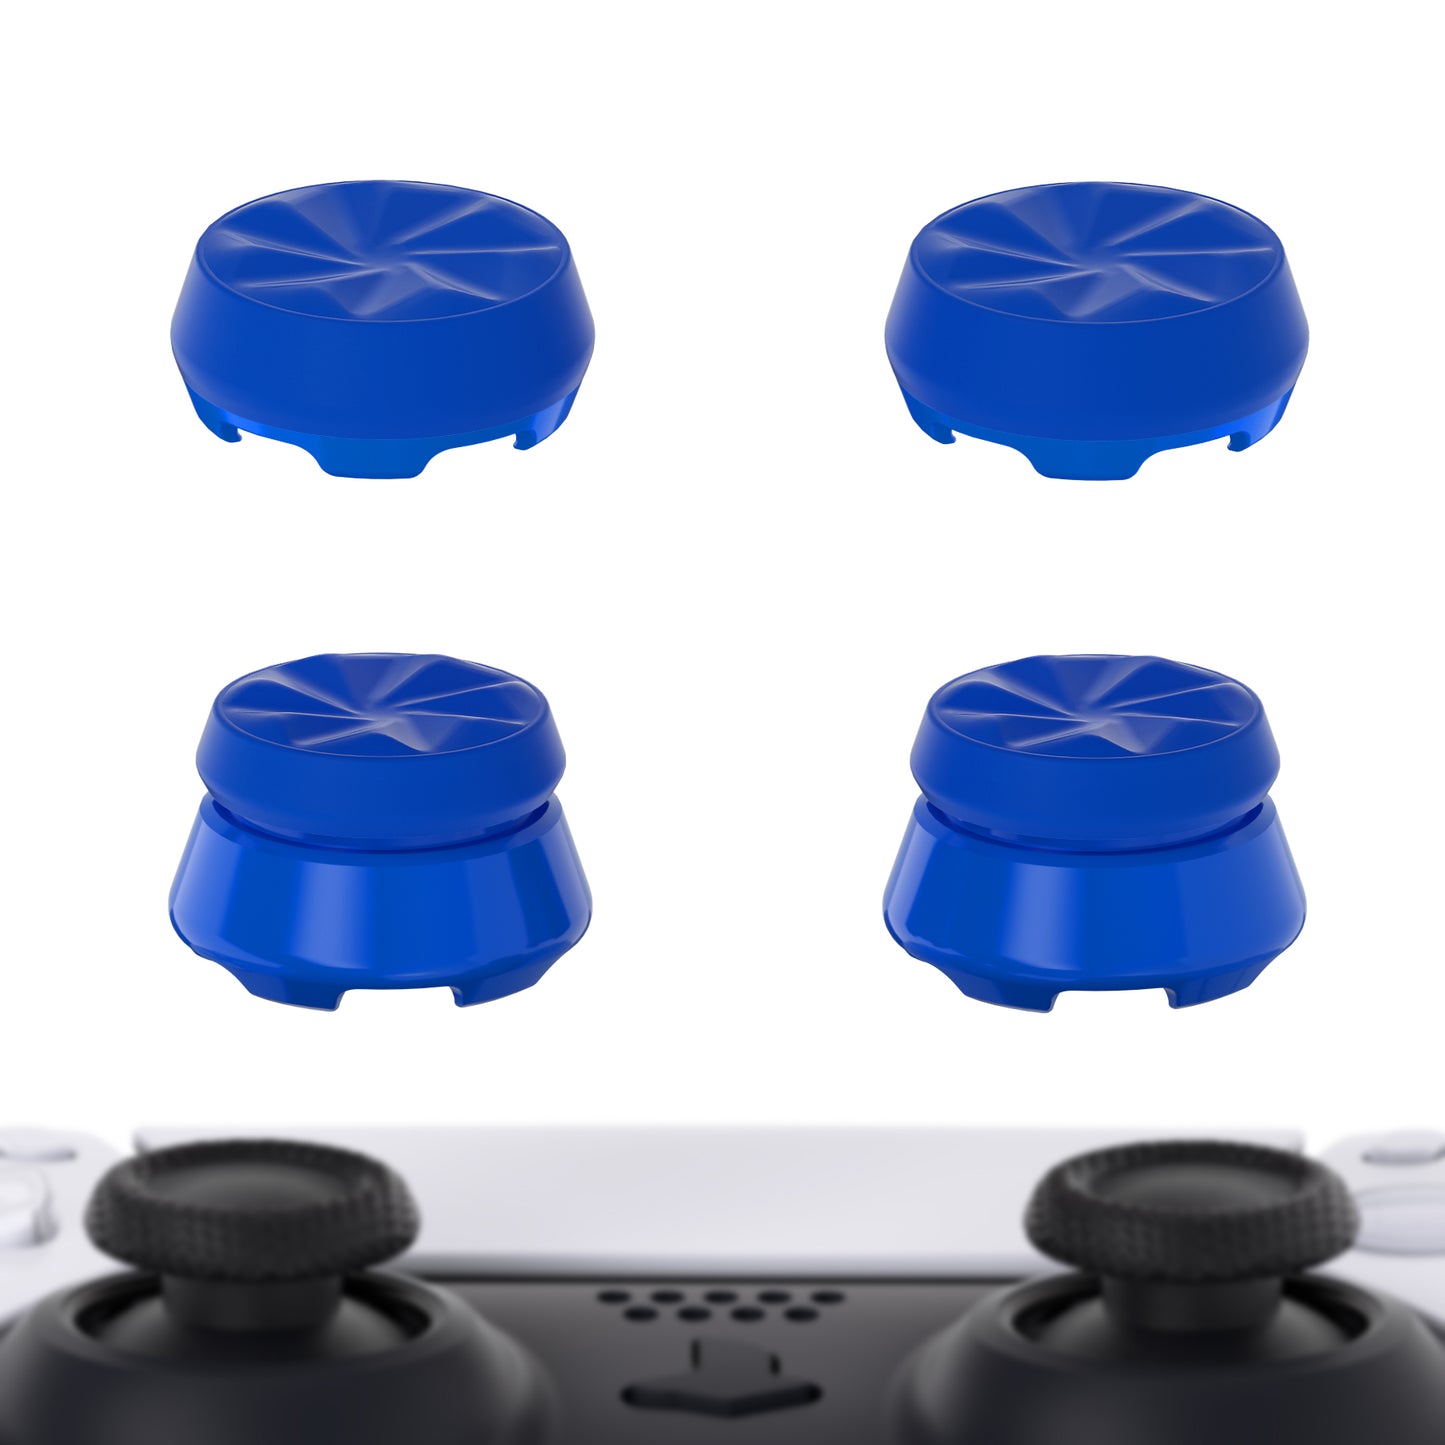 Products PlayVital Thumbs Assault Hurricane Thumbstick Extender for ps5 Controller, Thumb Grips for ps4 Controllers, Joystick Caps for ps5/4 Controller -2 High Raise and 2 Mid Raise Concave - Blue - PJM4007 PlayVital